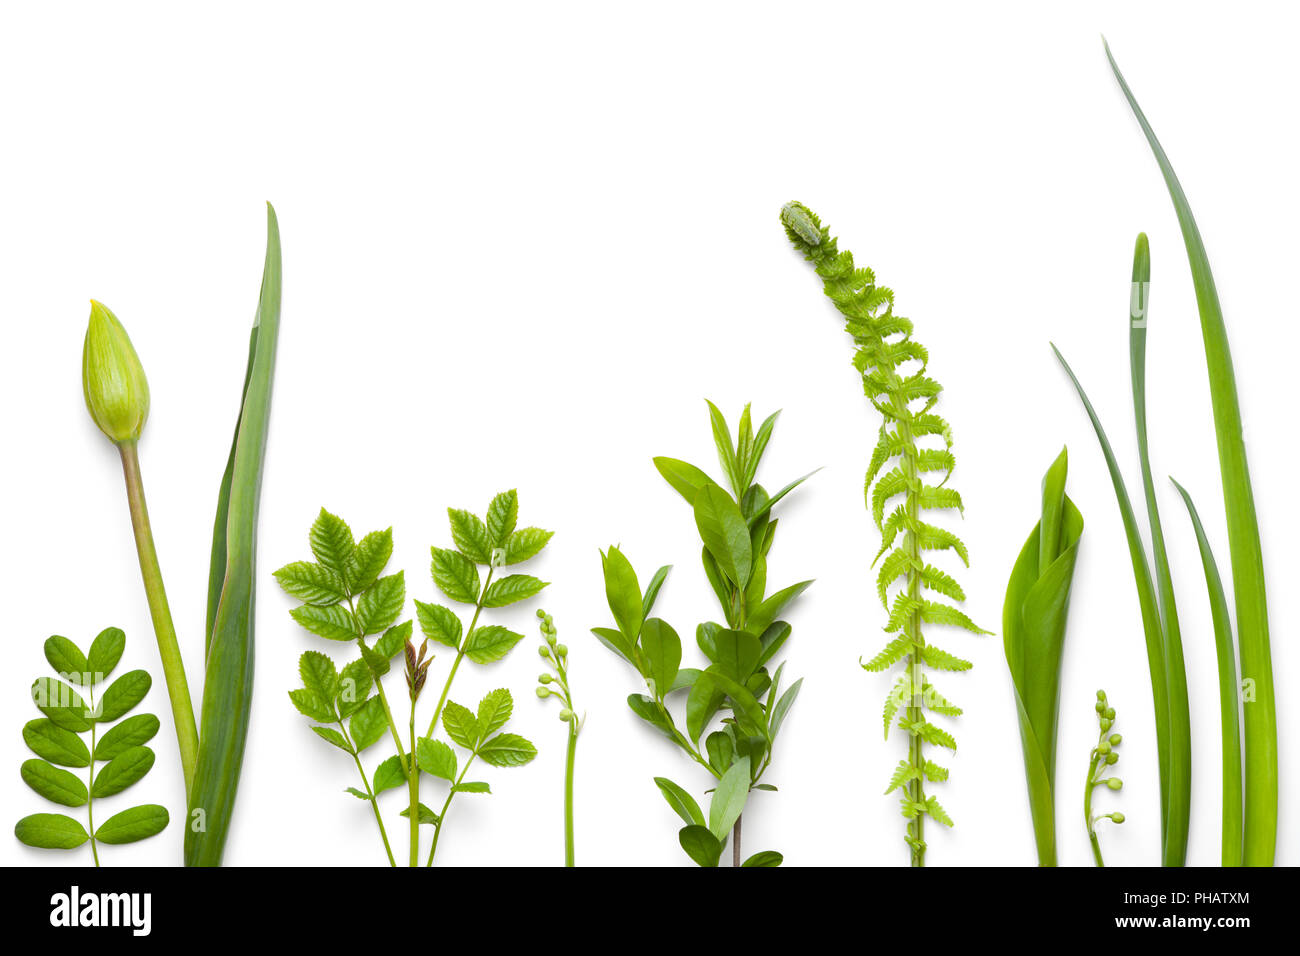 Green Plants Isolated on White Background Stock Photo